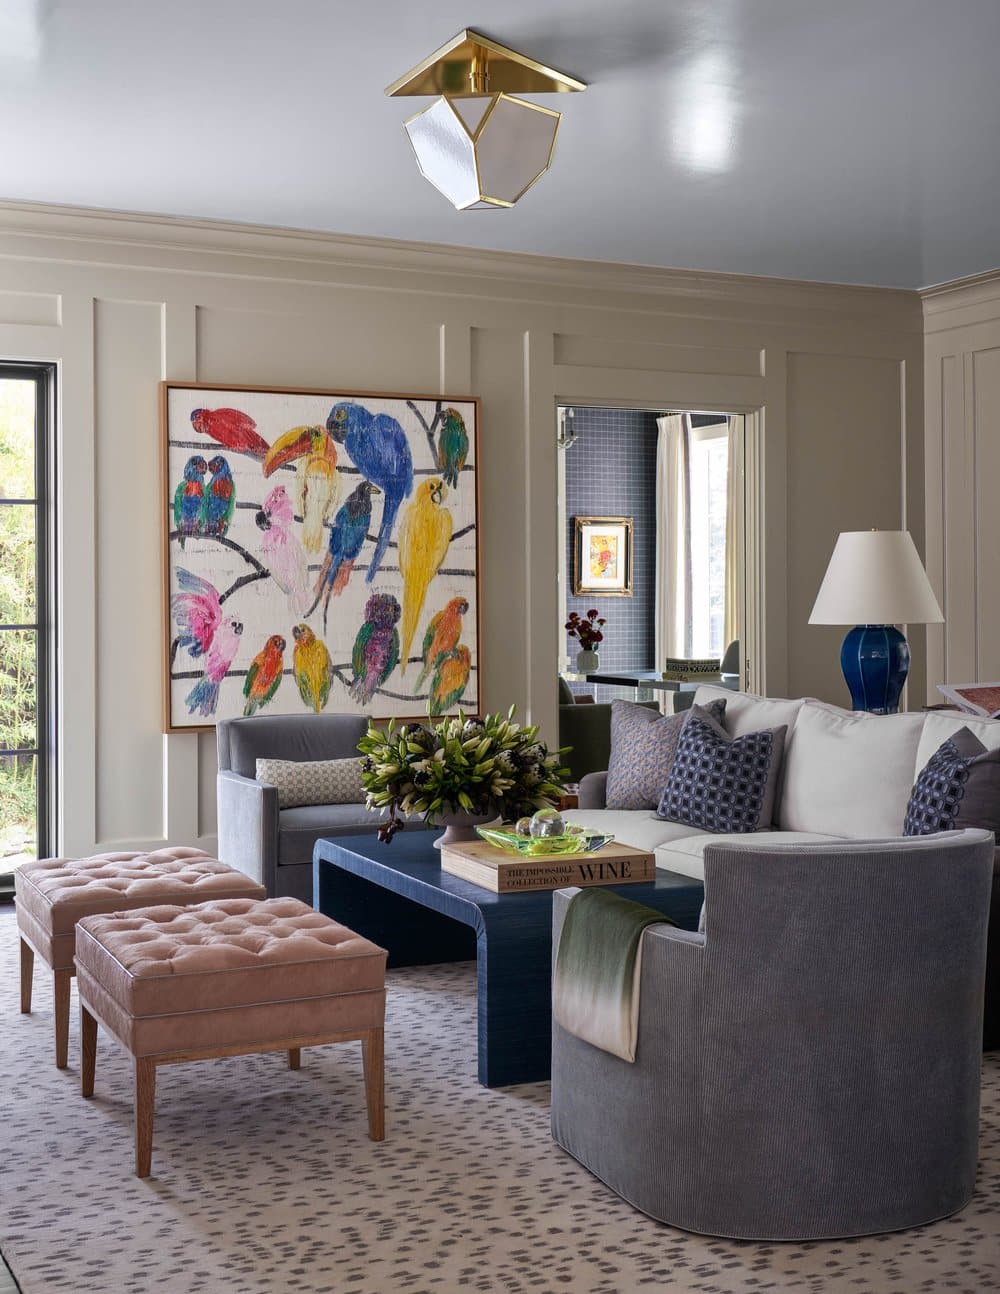 Mary Beth Wagner Interior Design| Nathan Schroder Photography - living room, art, abstract art, colorful art